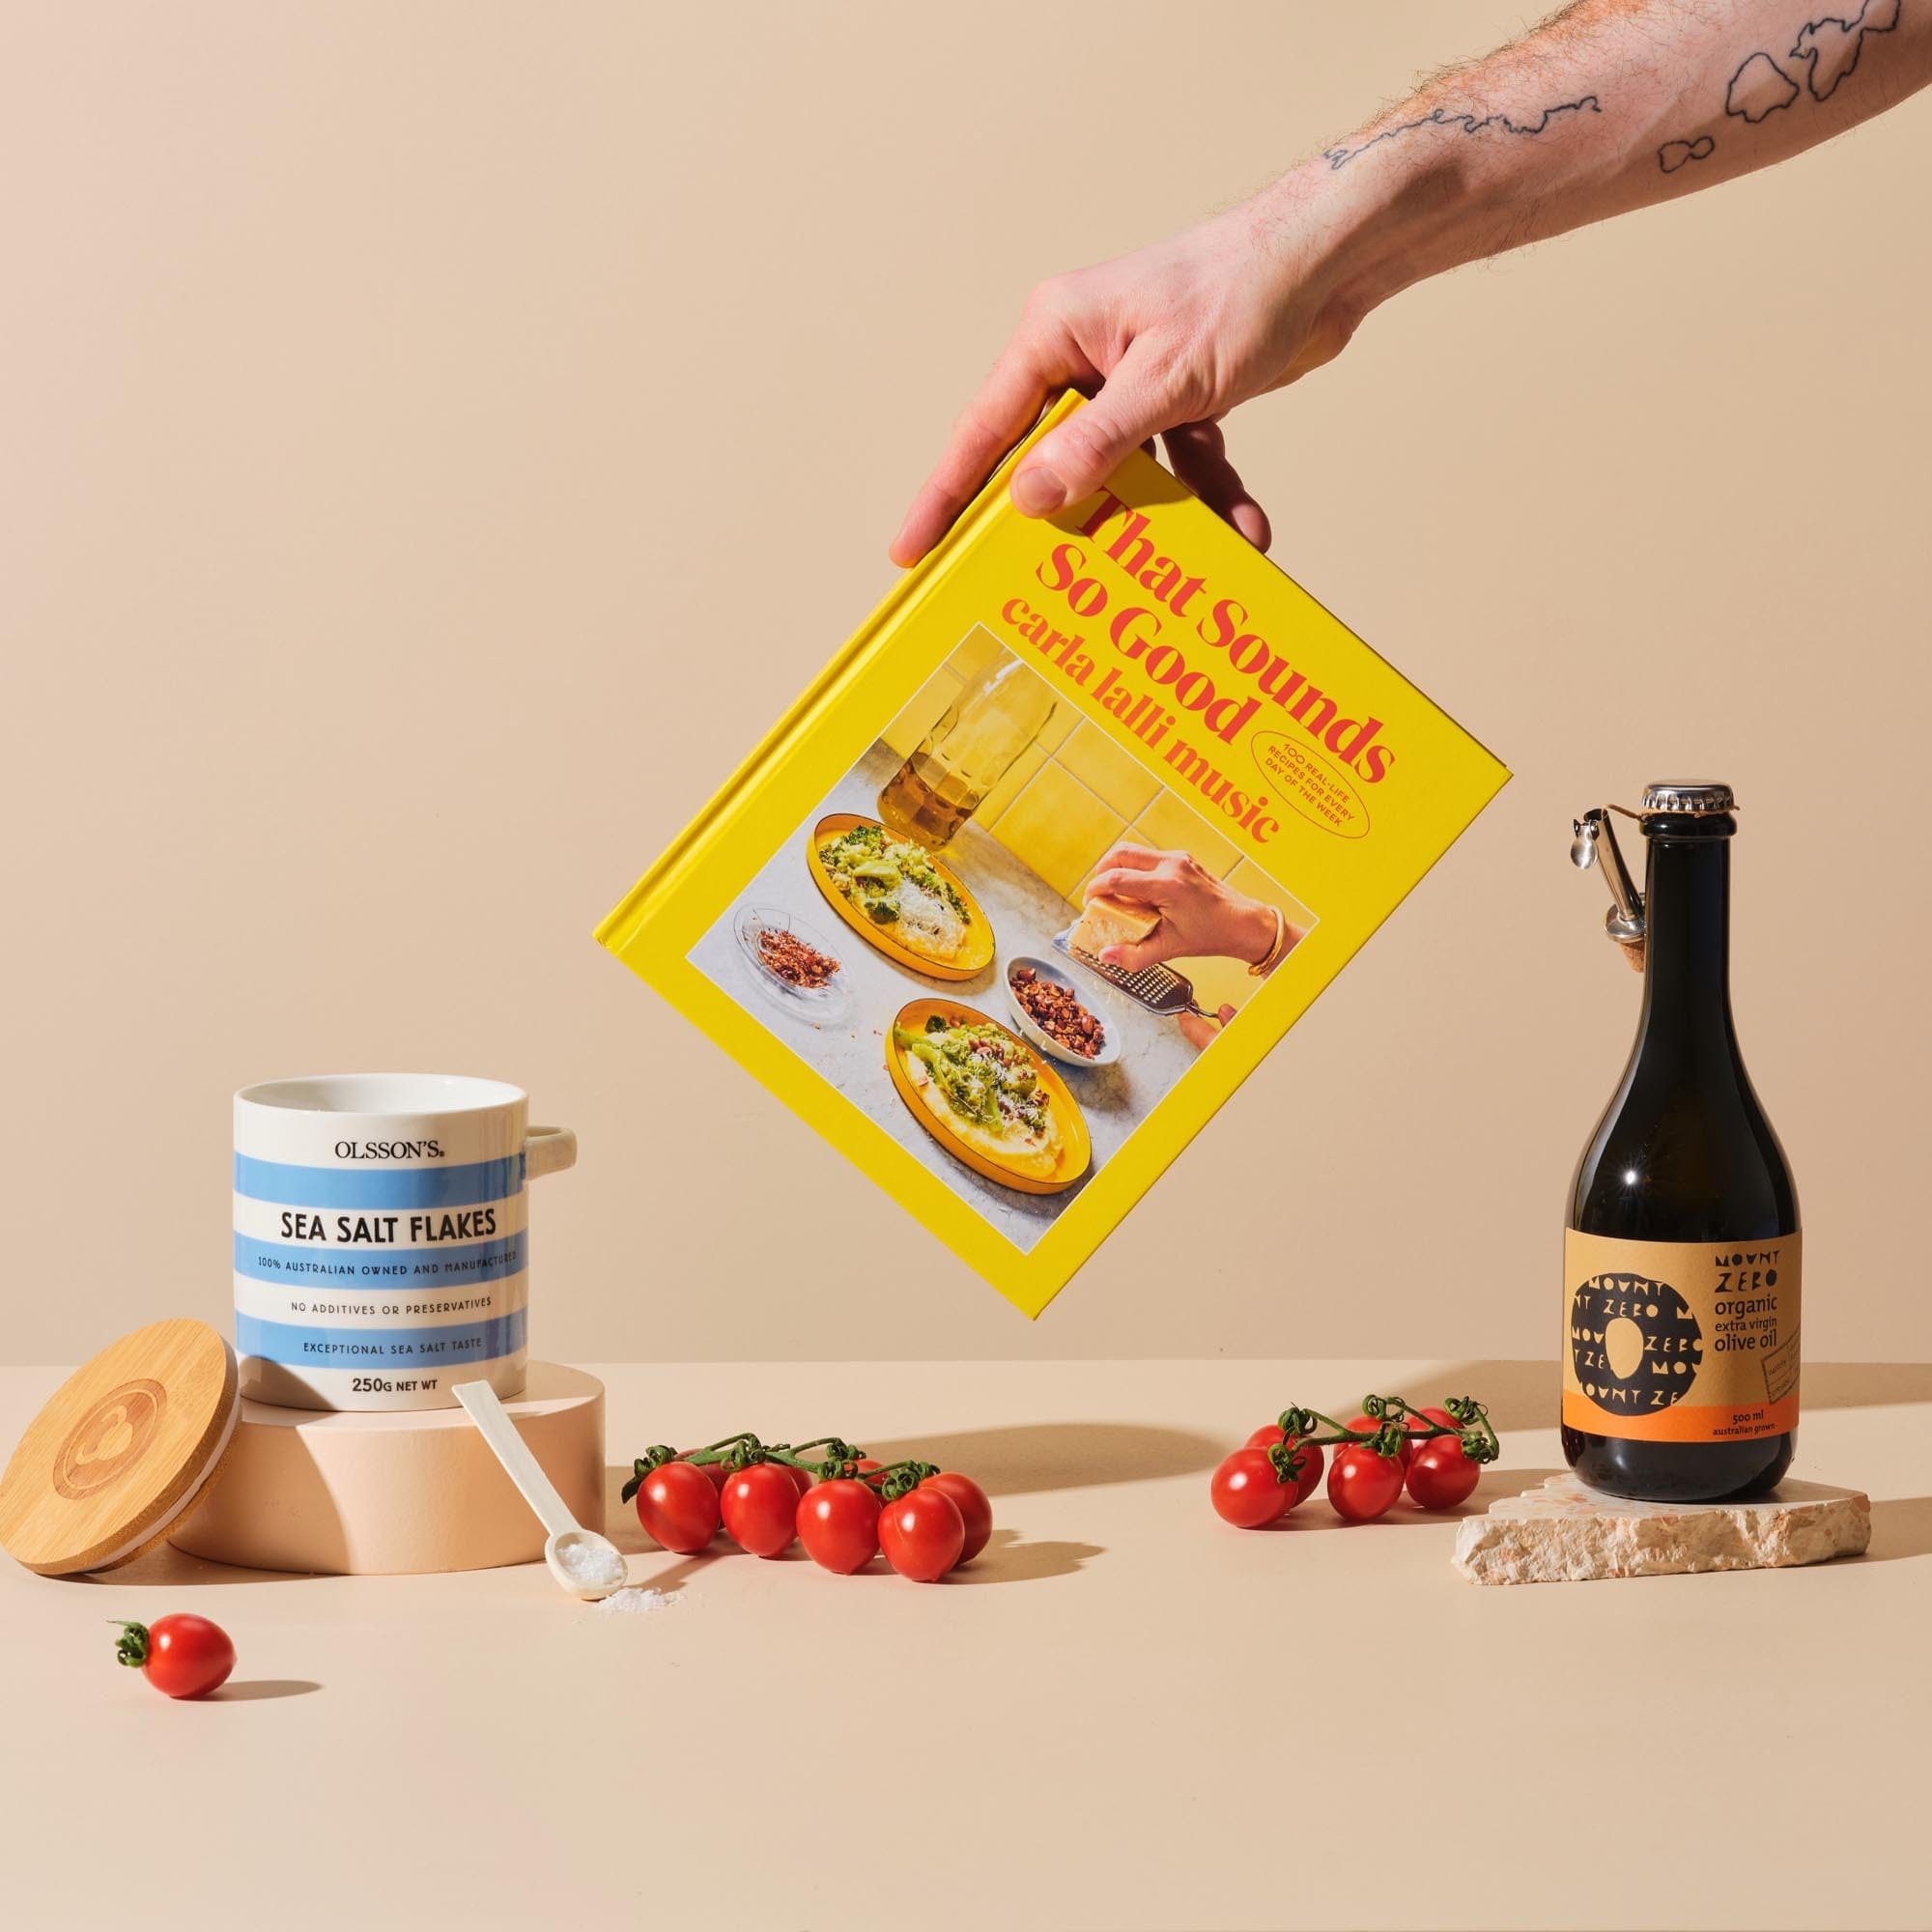 This is the Larder Love gift bundle from Handsel. Included in this image is That Sounds So Good, Olive oil and Sea salt flakes